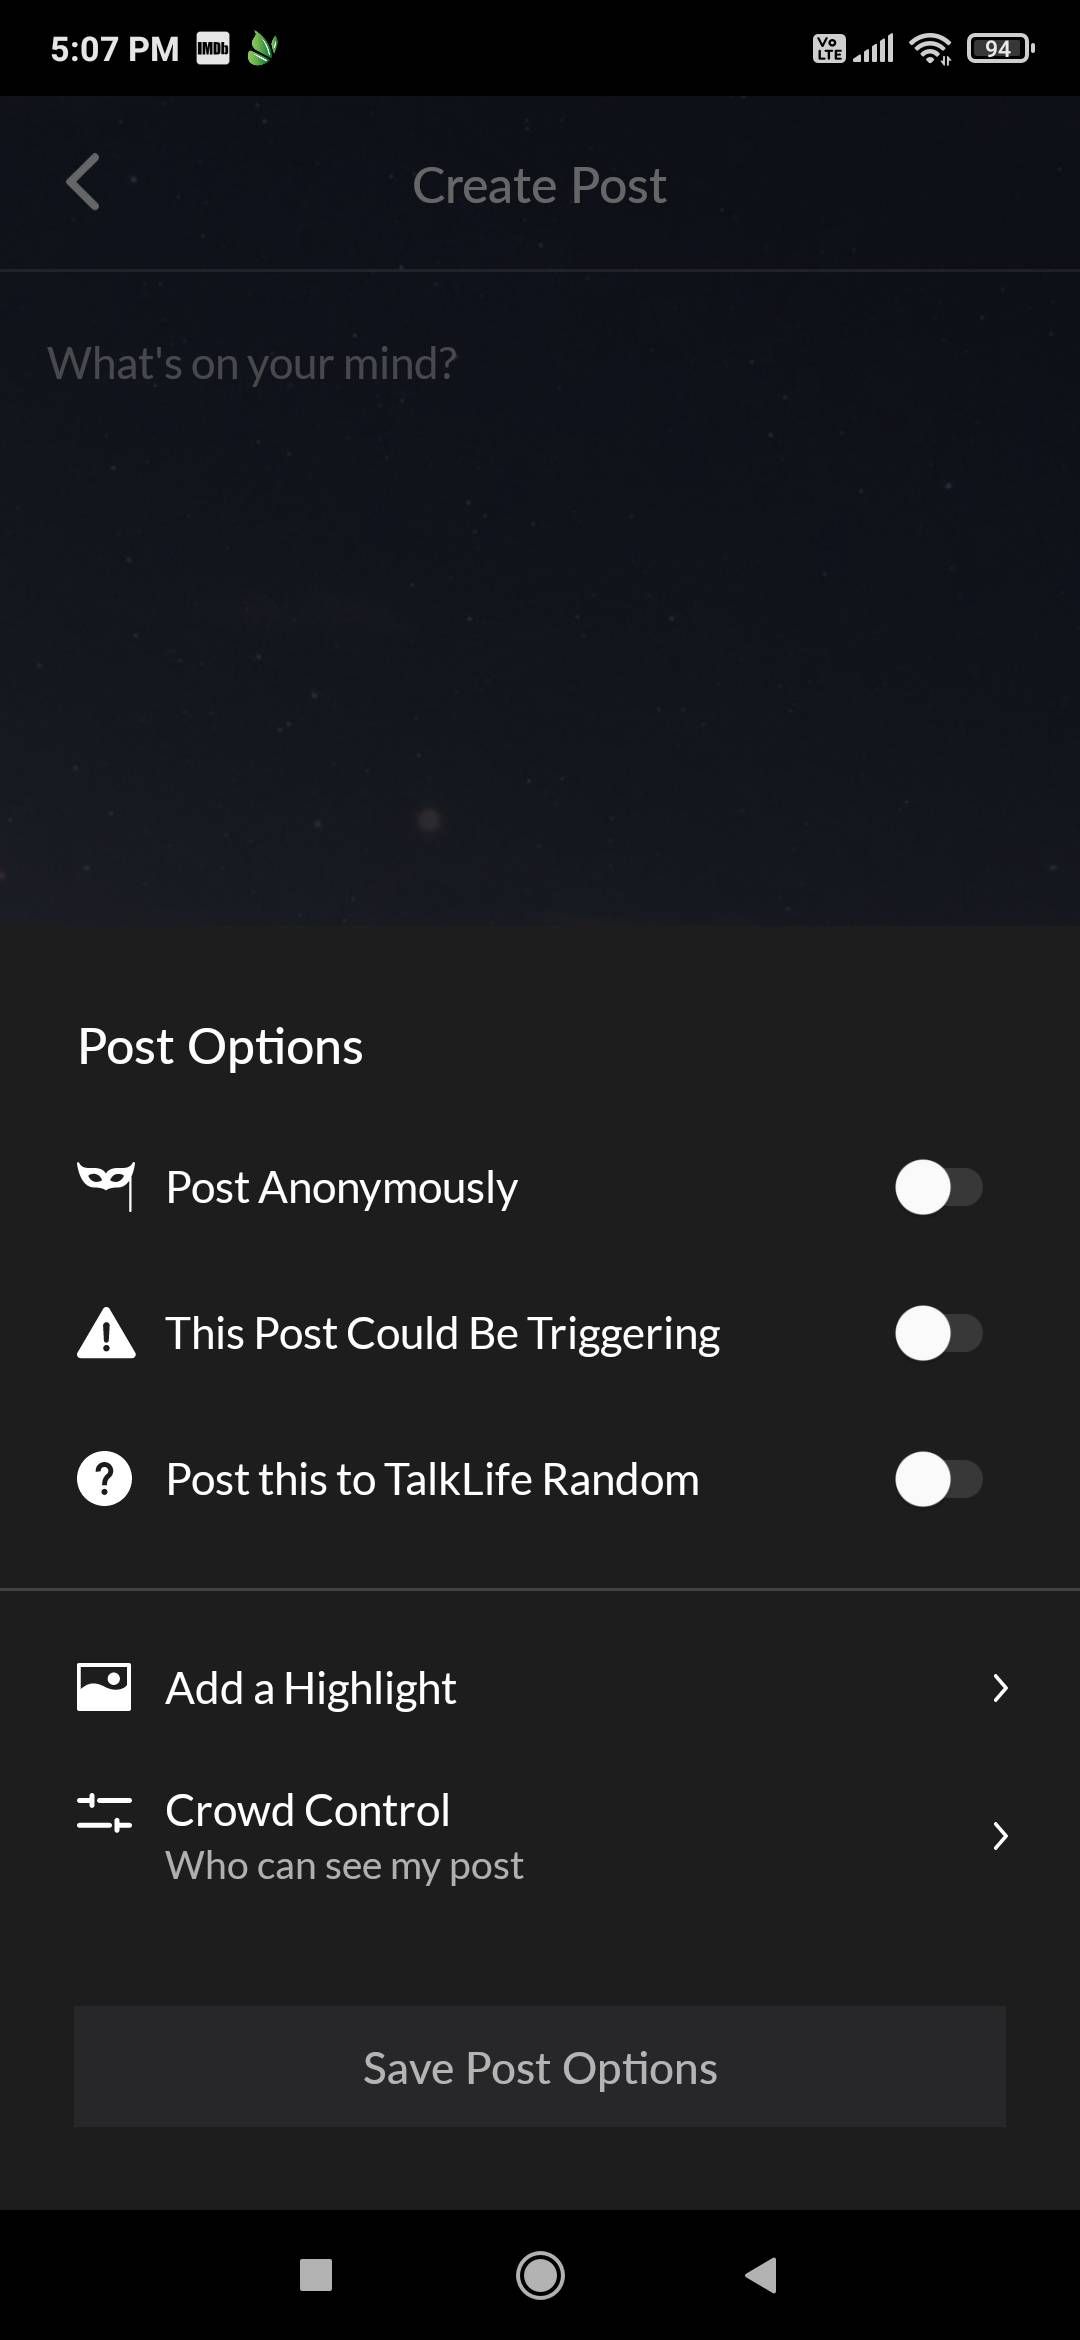 By letting you post anonymously, add a trigger warning, and restrict the audience of your post, TalkLife protects all participants